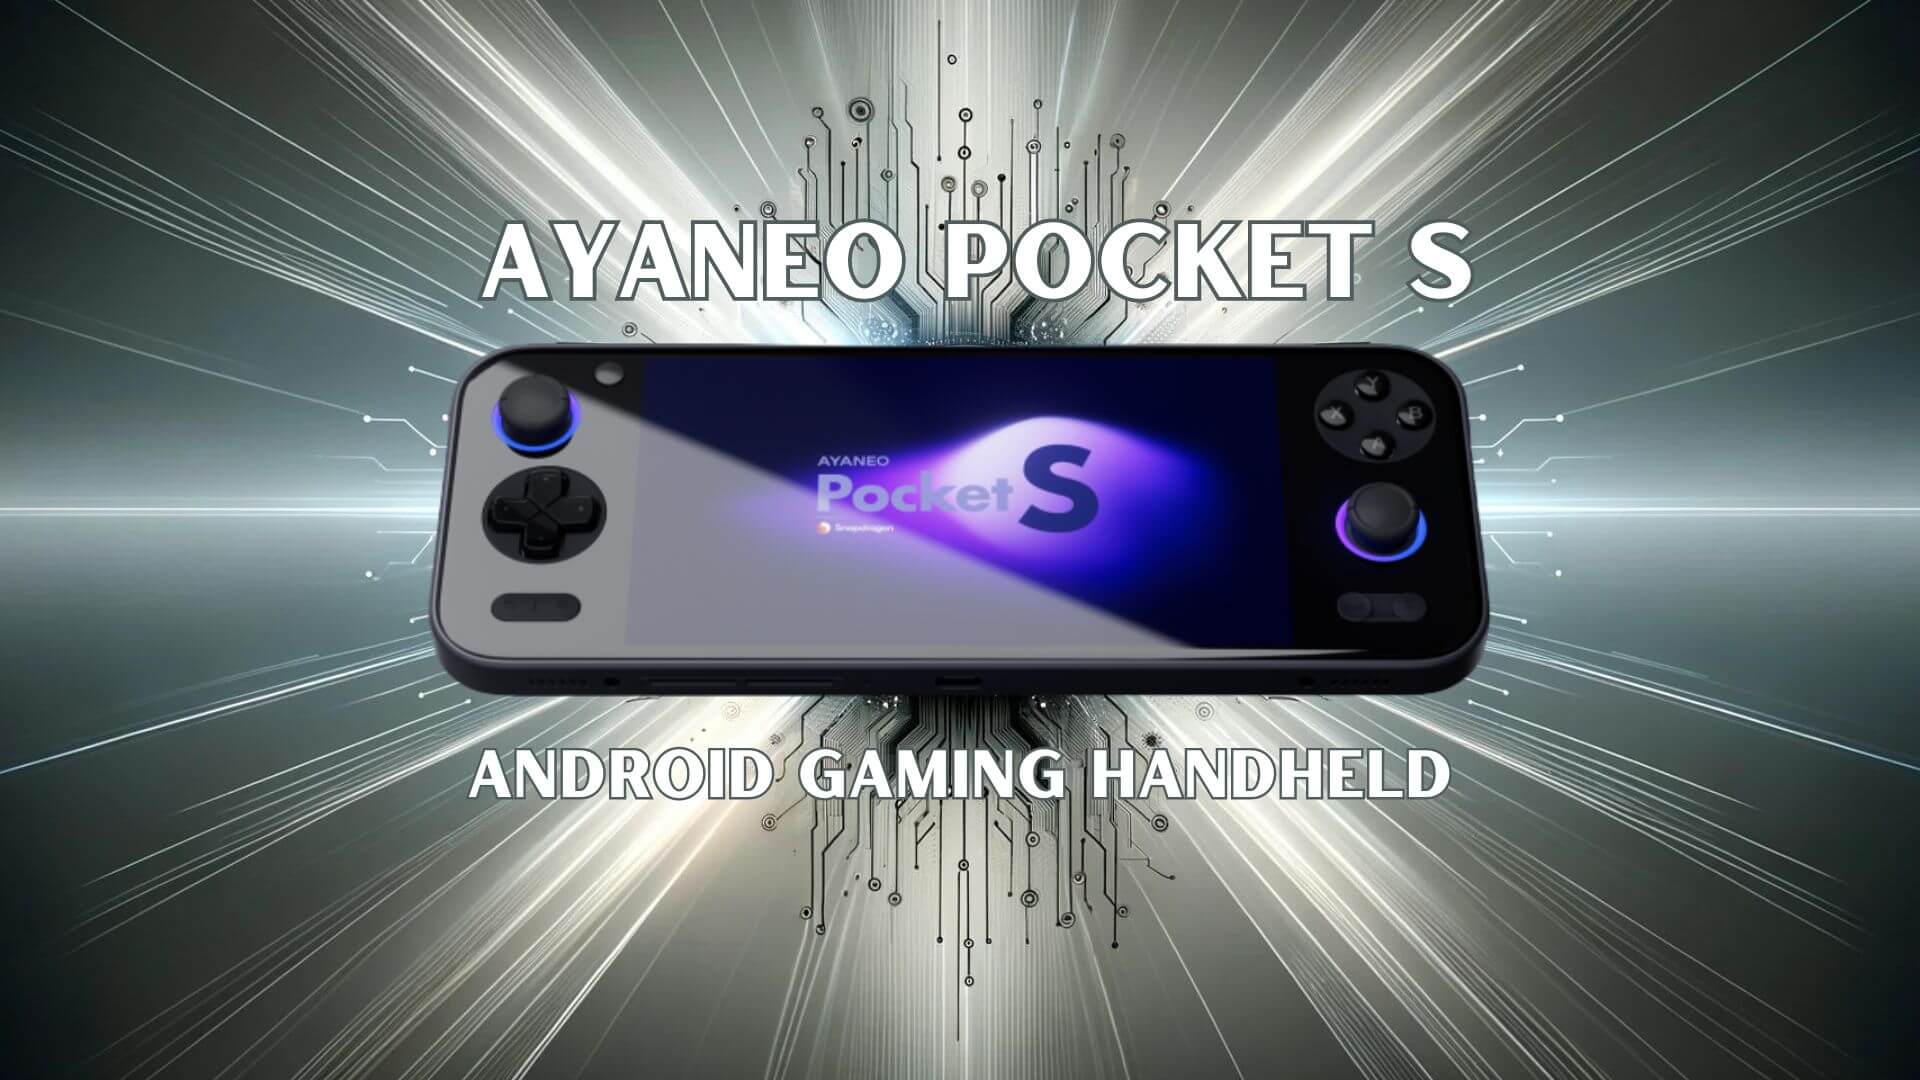 AYANEO Pocket S pre-orders now available – latest Snapdragon generation Android gaming handheld